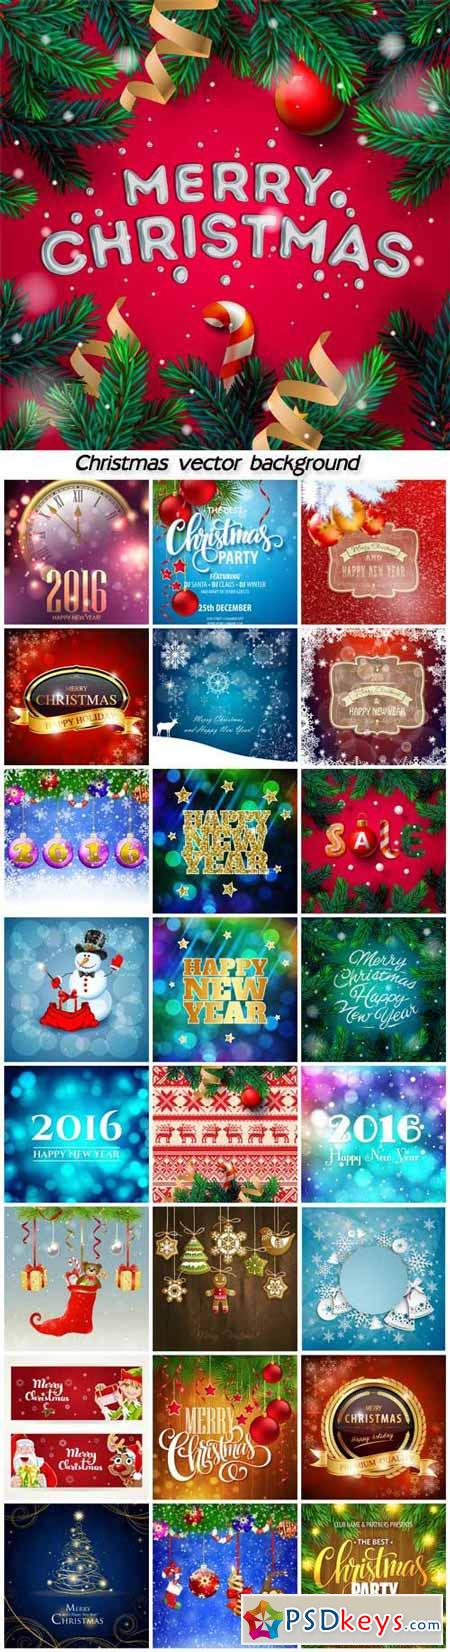 Christmas decoration on vector background